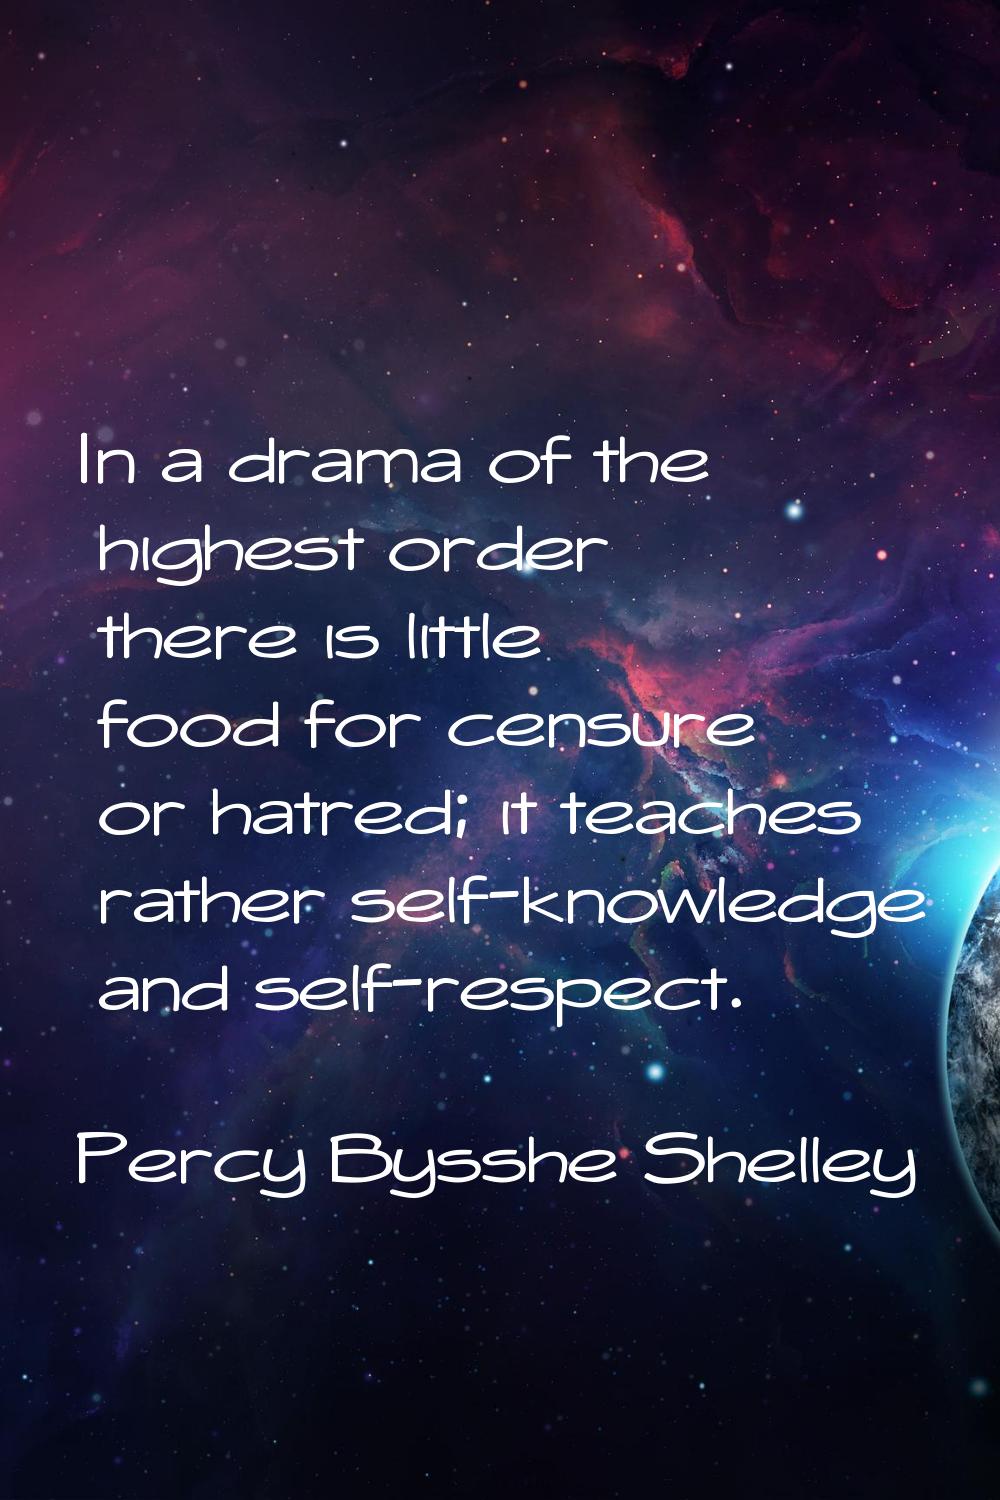 In a drama of the highest order there is little food for censure or hatred; it teaches rather self-